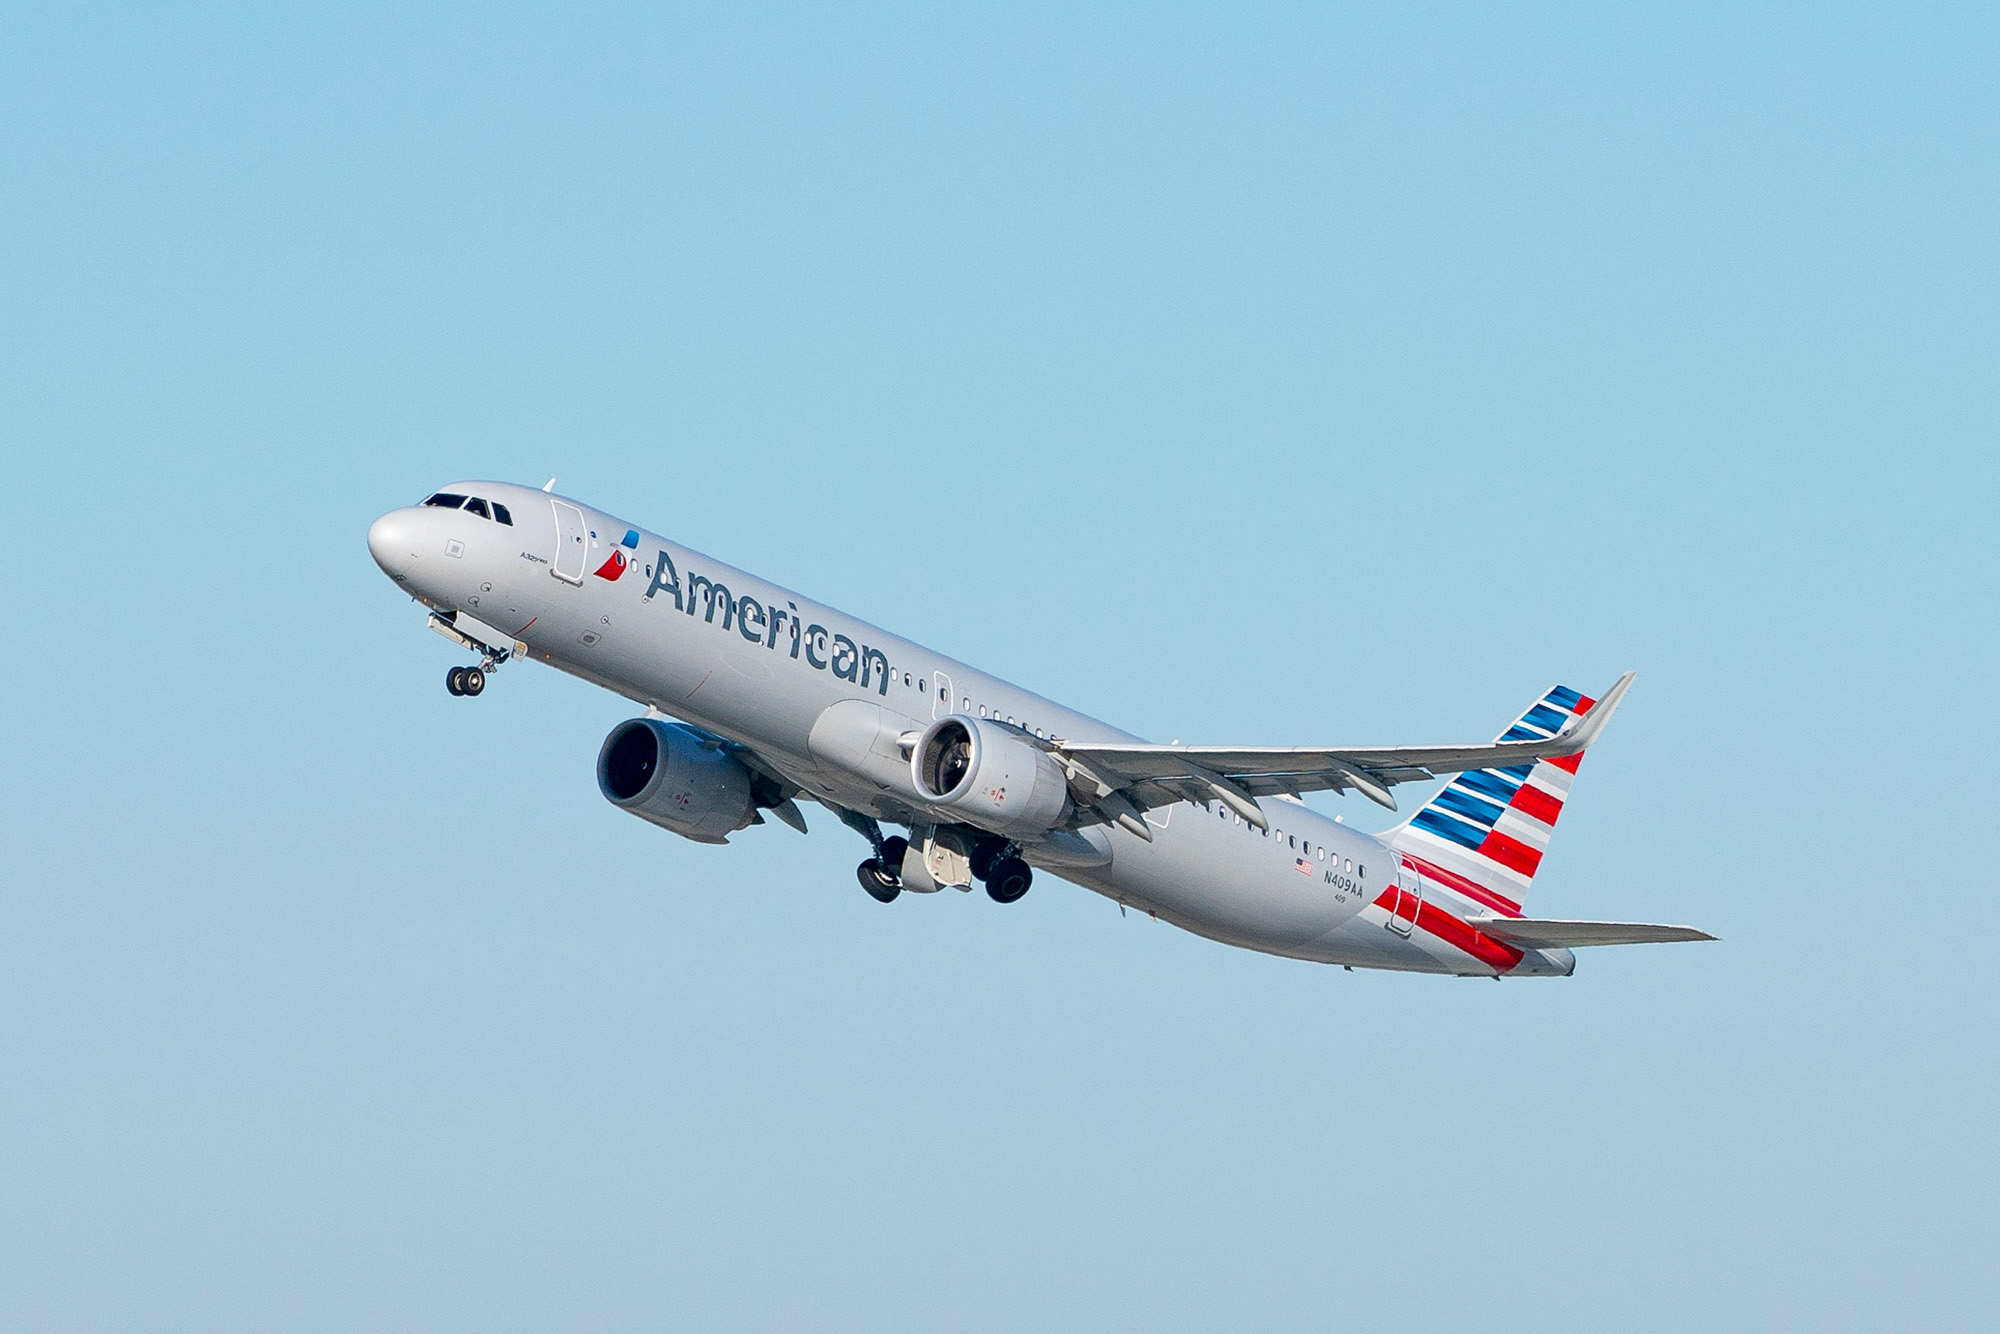 PHOTO: American Airlines Airbus A321-253NX takes off from Los Angeles international Airport, Nov. 11, 2020